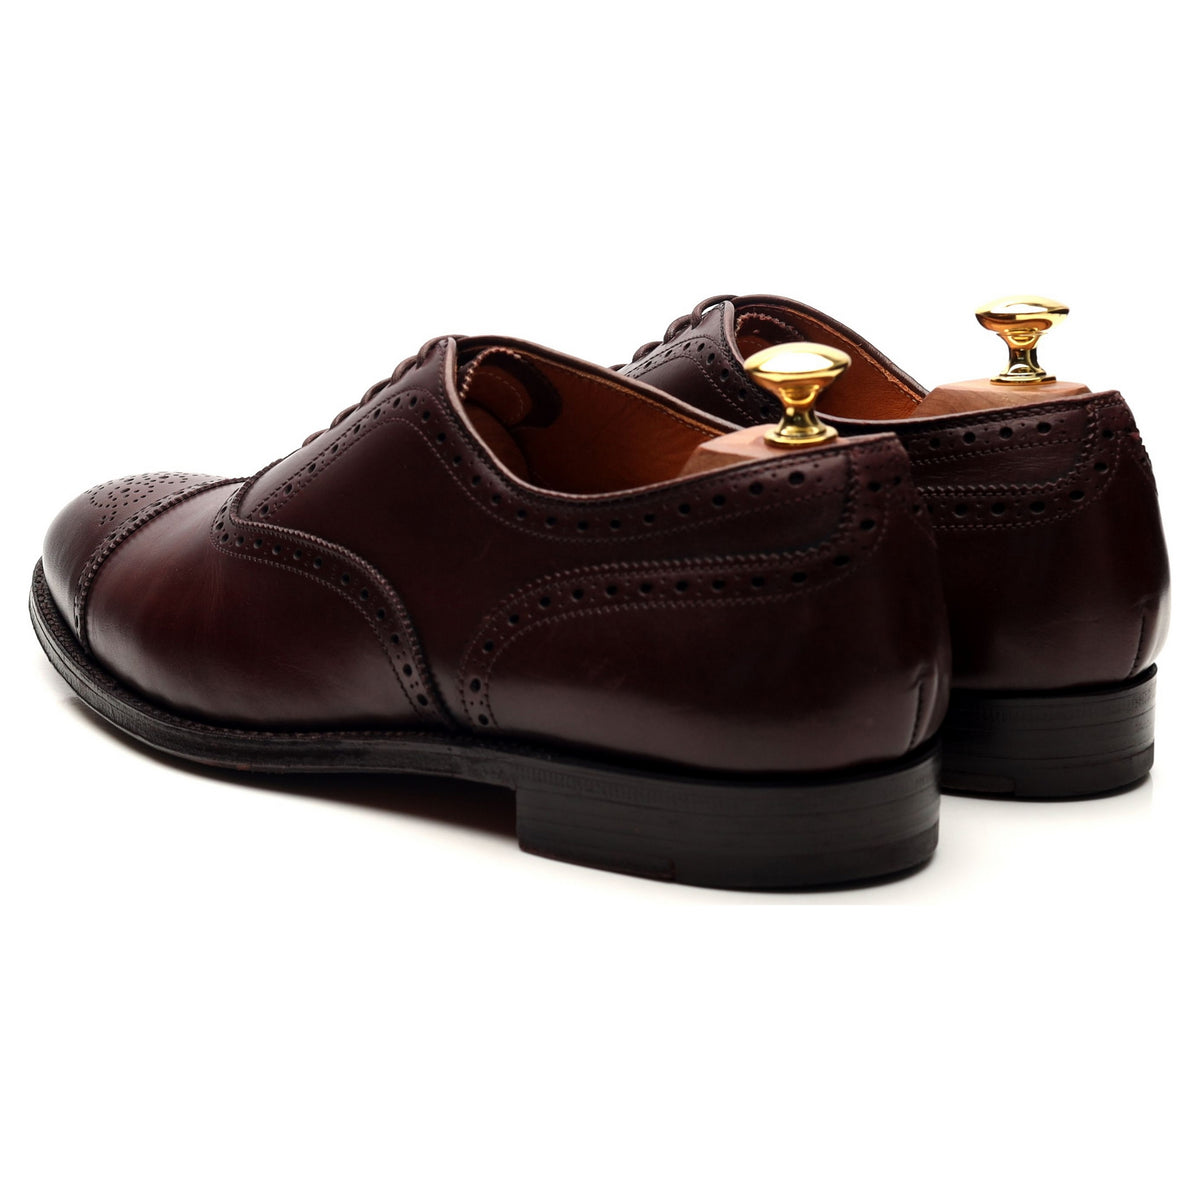 &#39;908&#39; Burgundy Leather Oxford Brogues UK 10 US 10.5 D